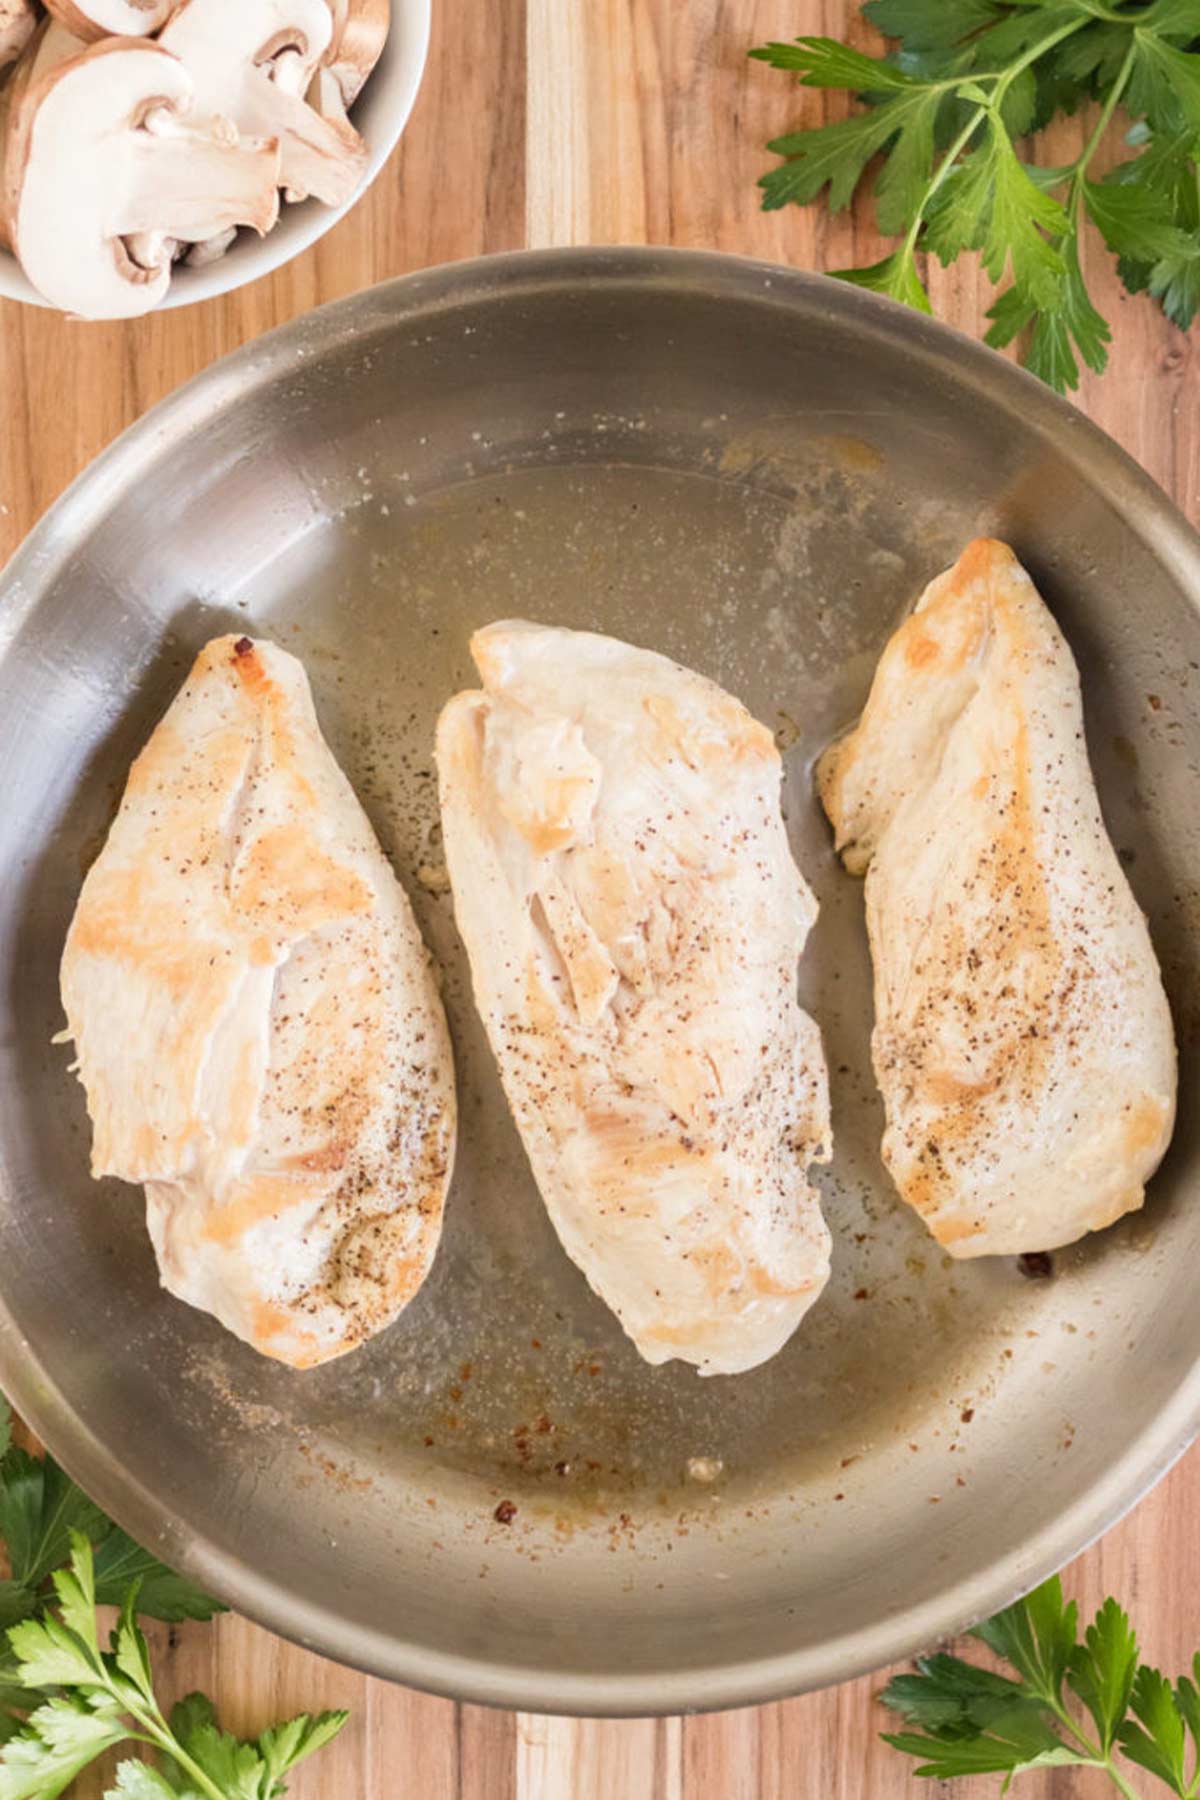 Chicken breasts are first cooked in a pan when making Champagne chicken.